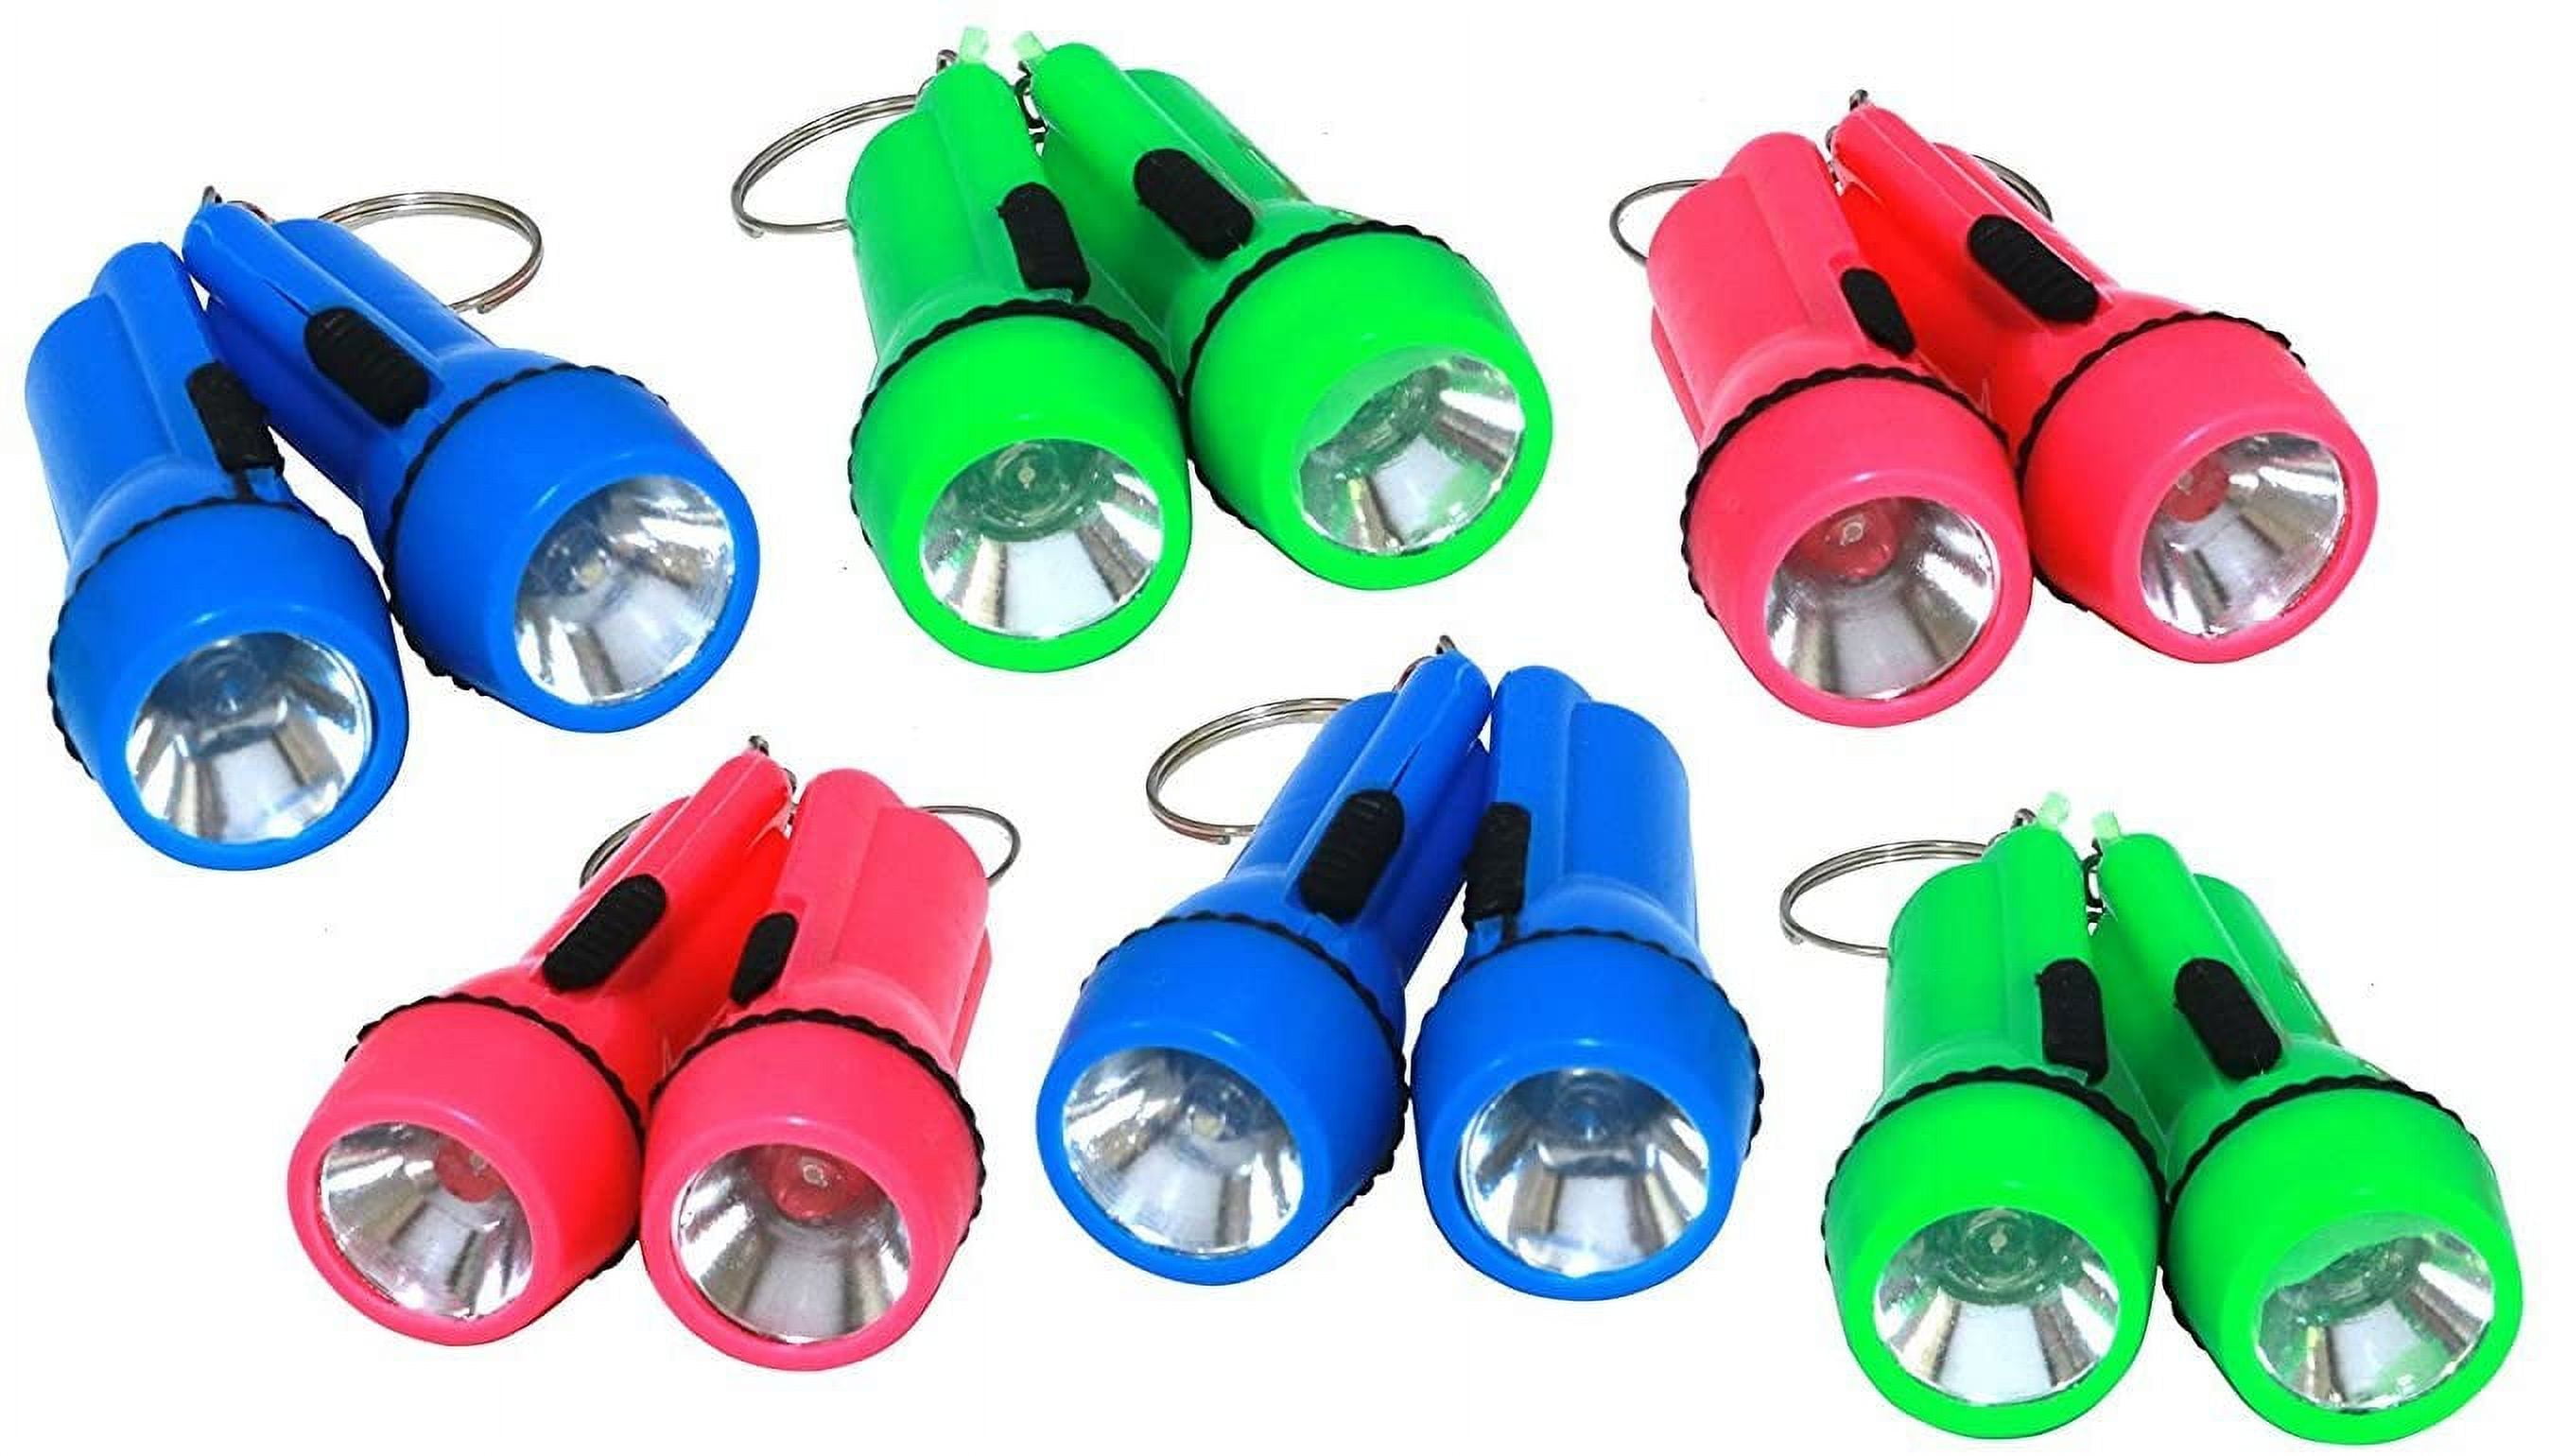 Kicko 12-Pack Mini Flashlight Keychains - Assorted Colors with